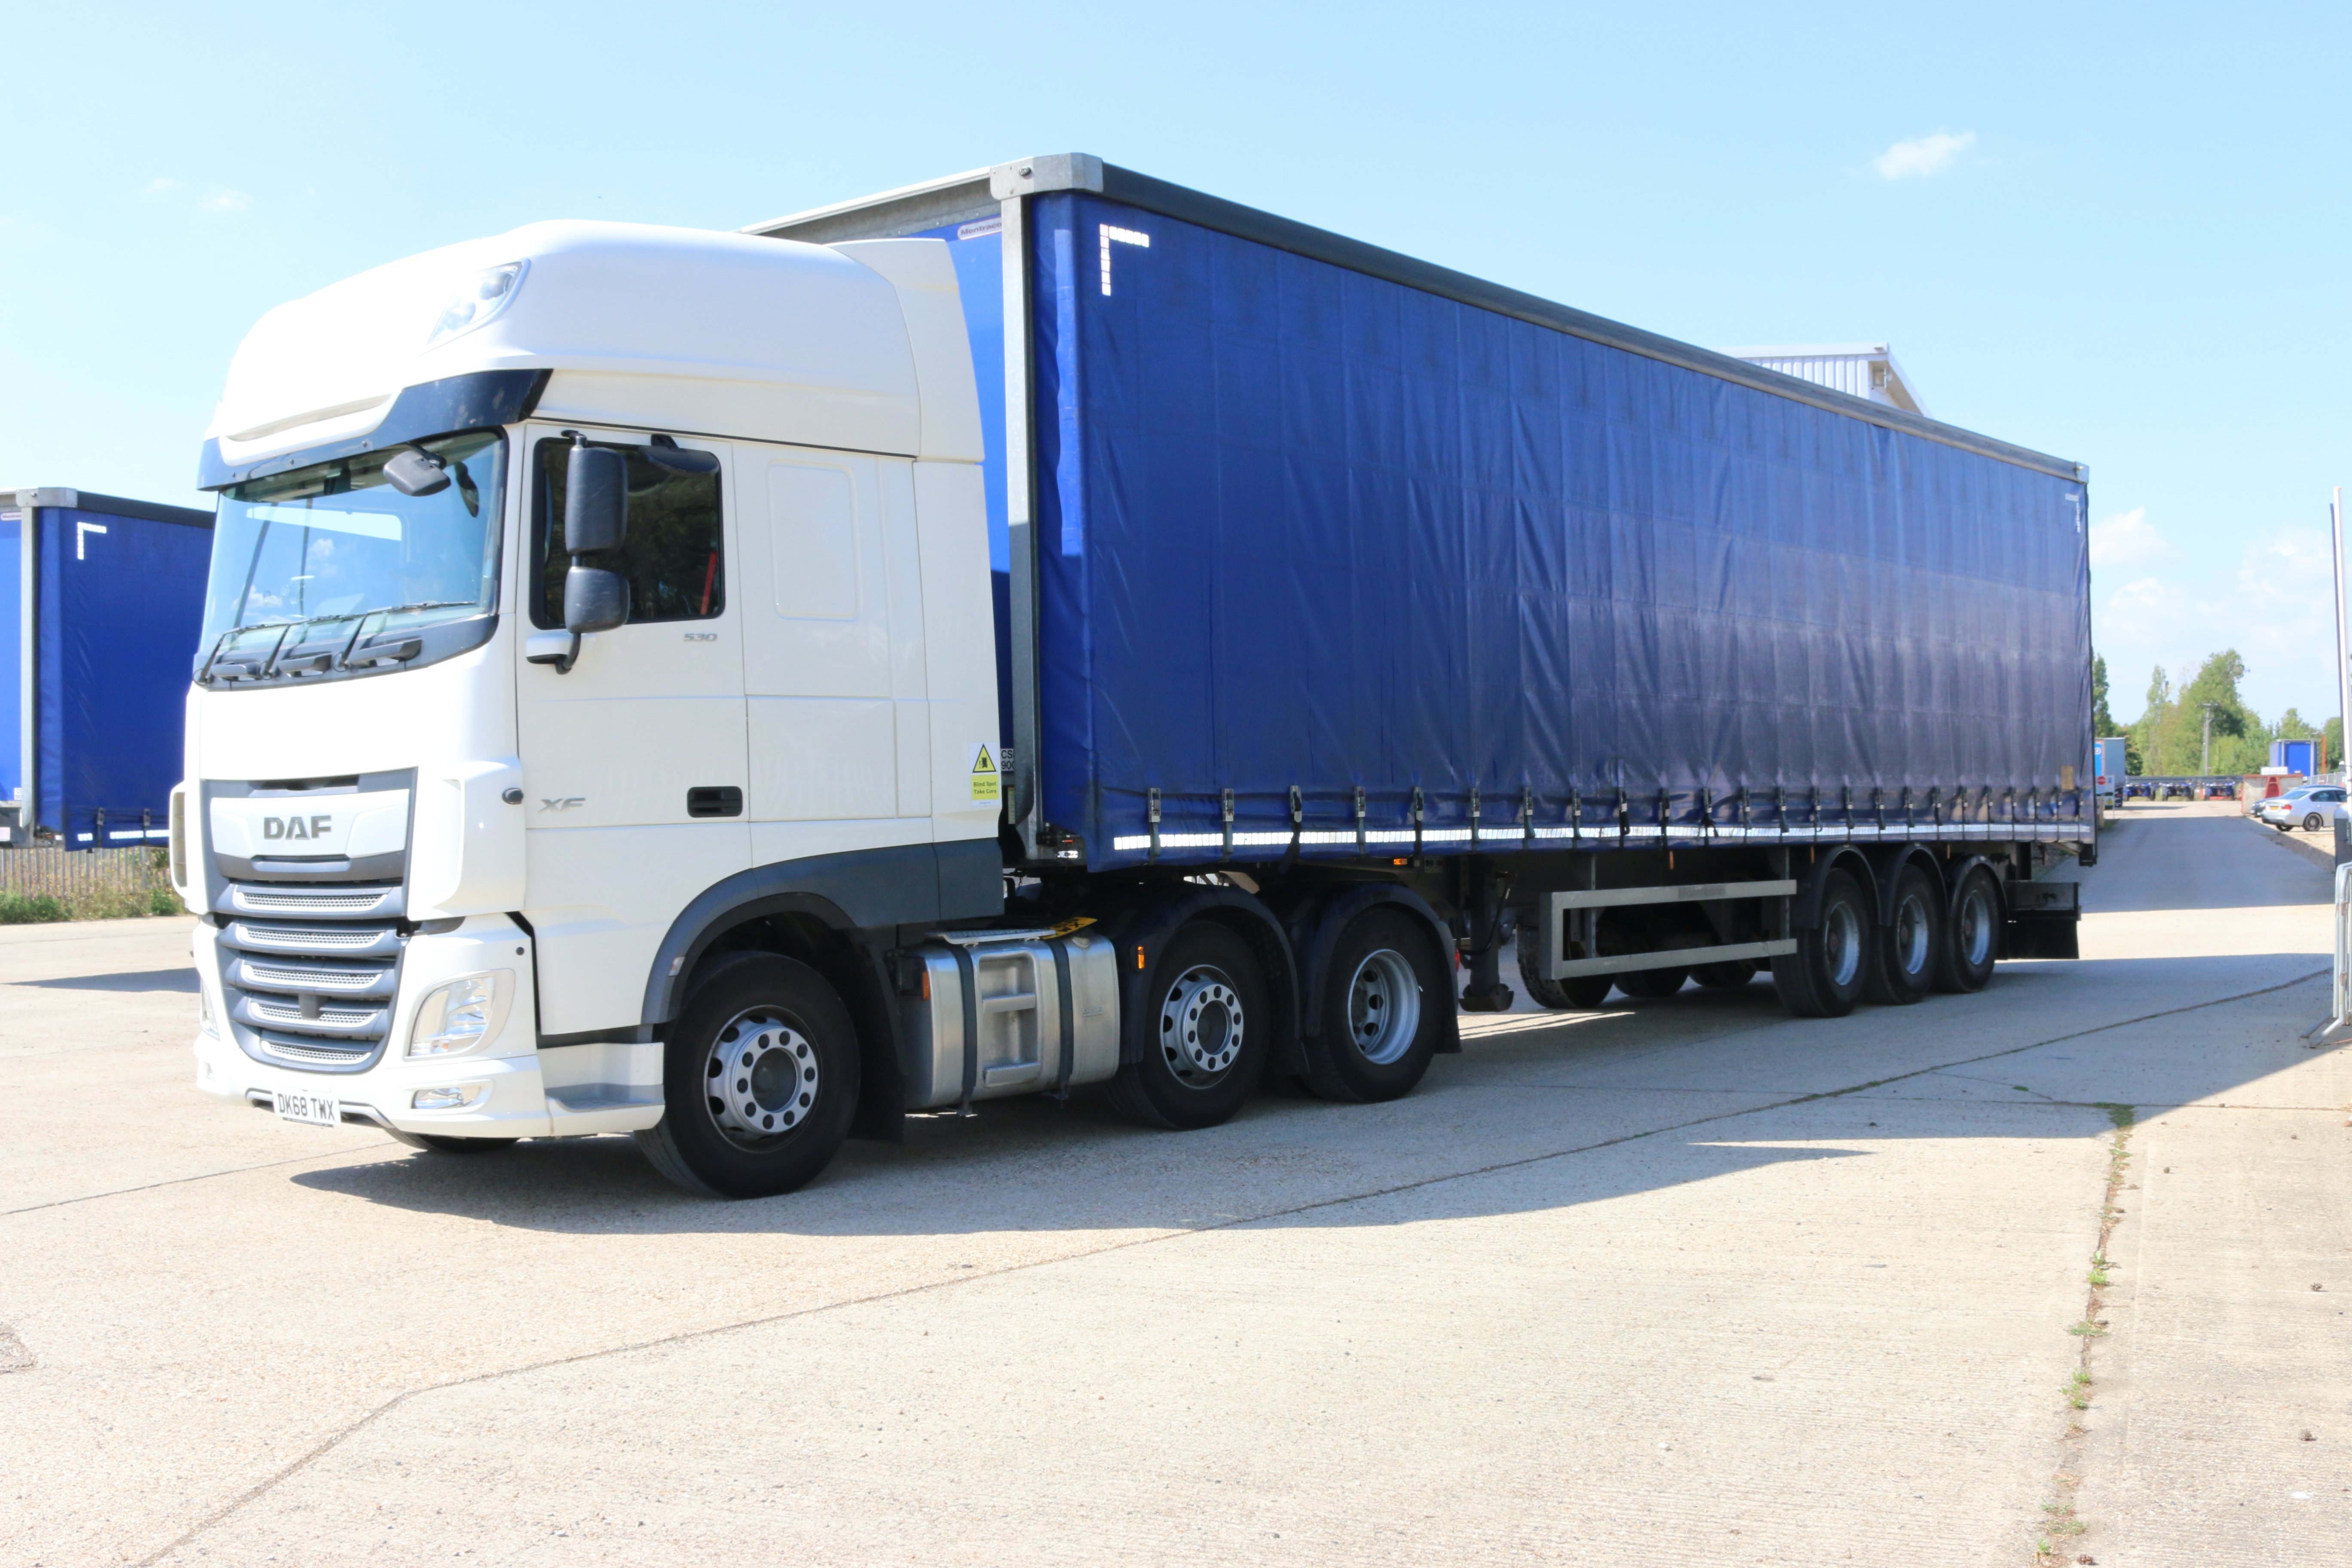 One of Aegg's new lorries from its fleet, with 4 stars ECO stars rating